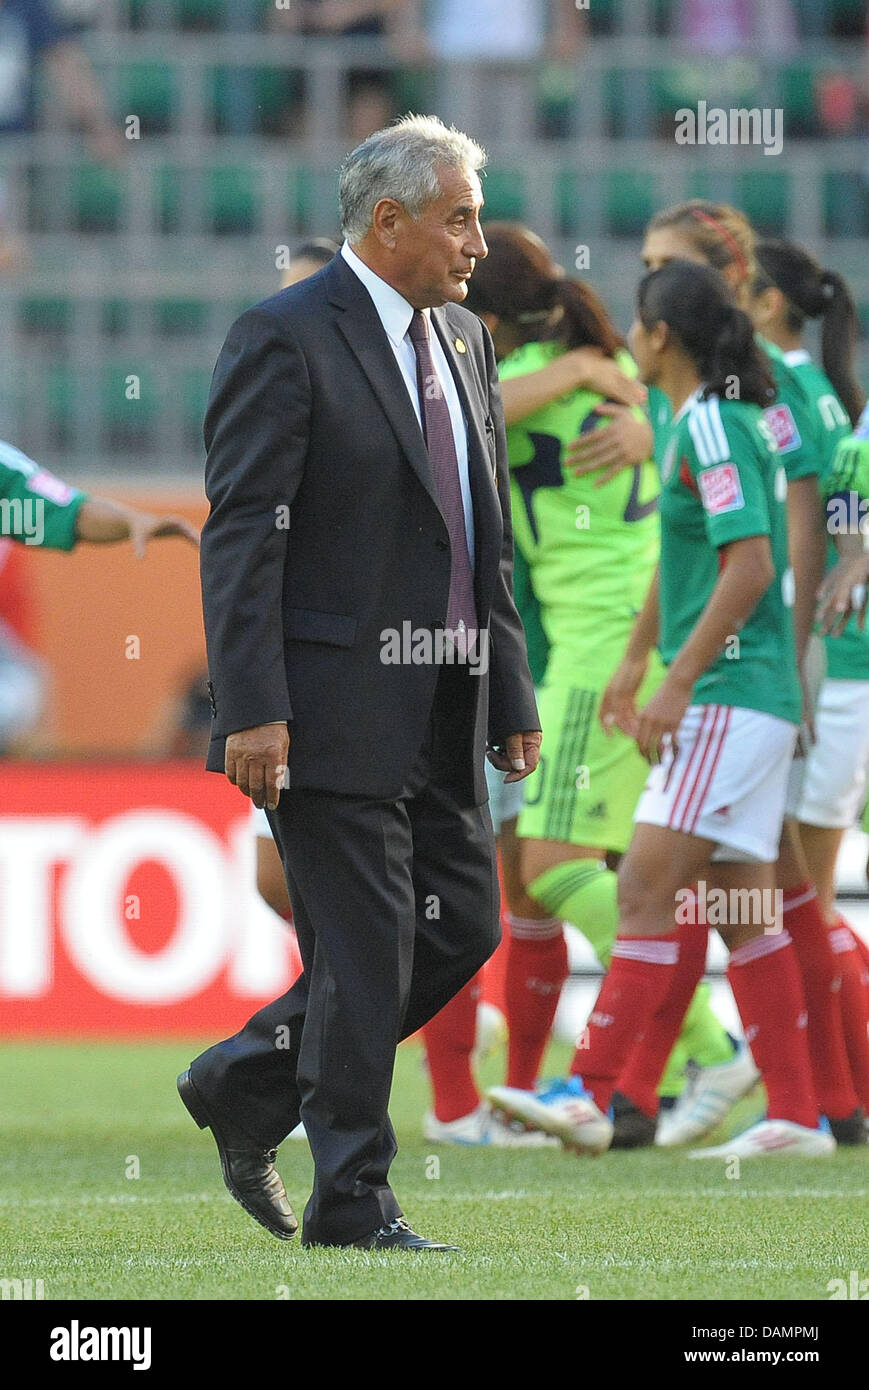 Head coach Leonardo Cuellar of Mexico reacts after the Group B match Mexico against England of FIFA Women's World Cup soccer tournament at the Arena Im Allerpark in Wolfsburg, Germany, 27 June 2011. Foto: Peter Steffen dpa/lni Stock Photo